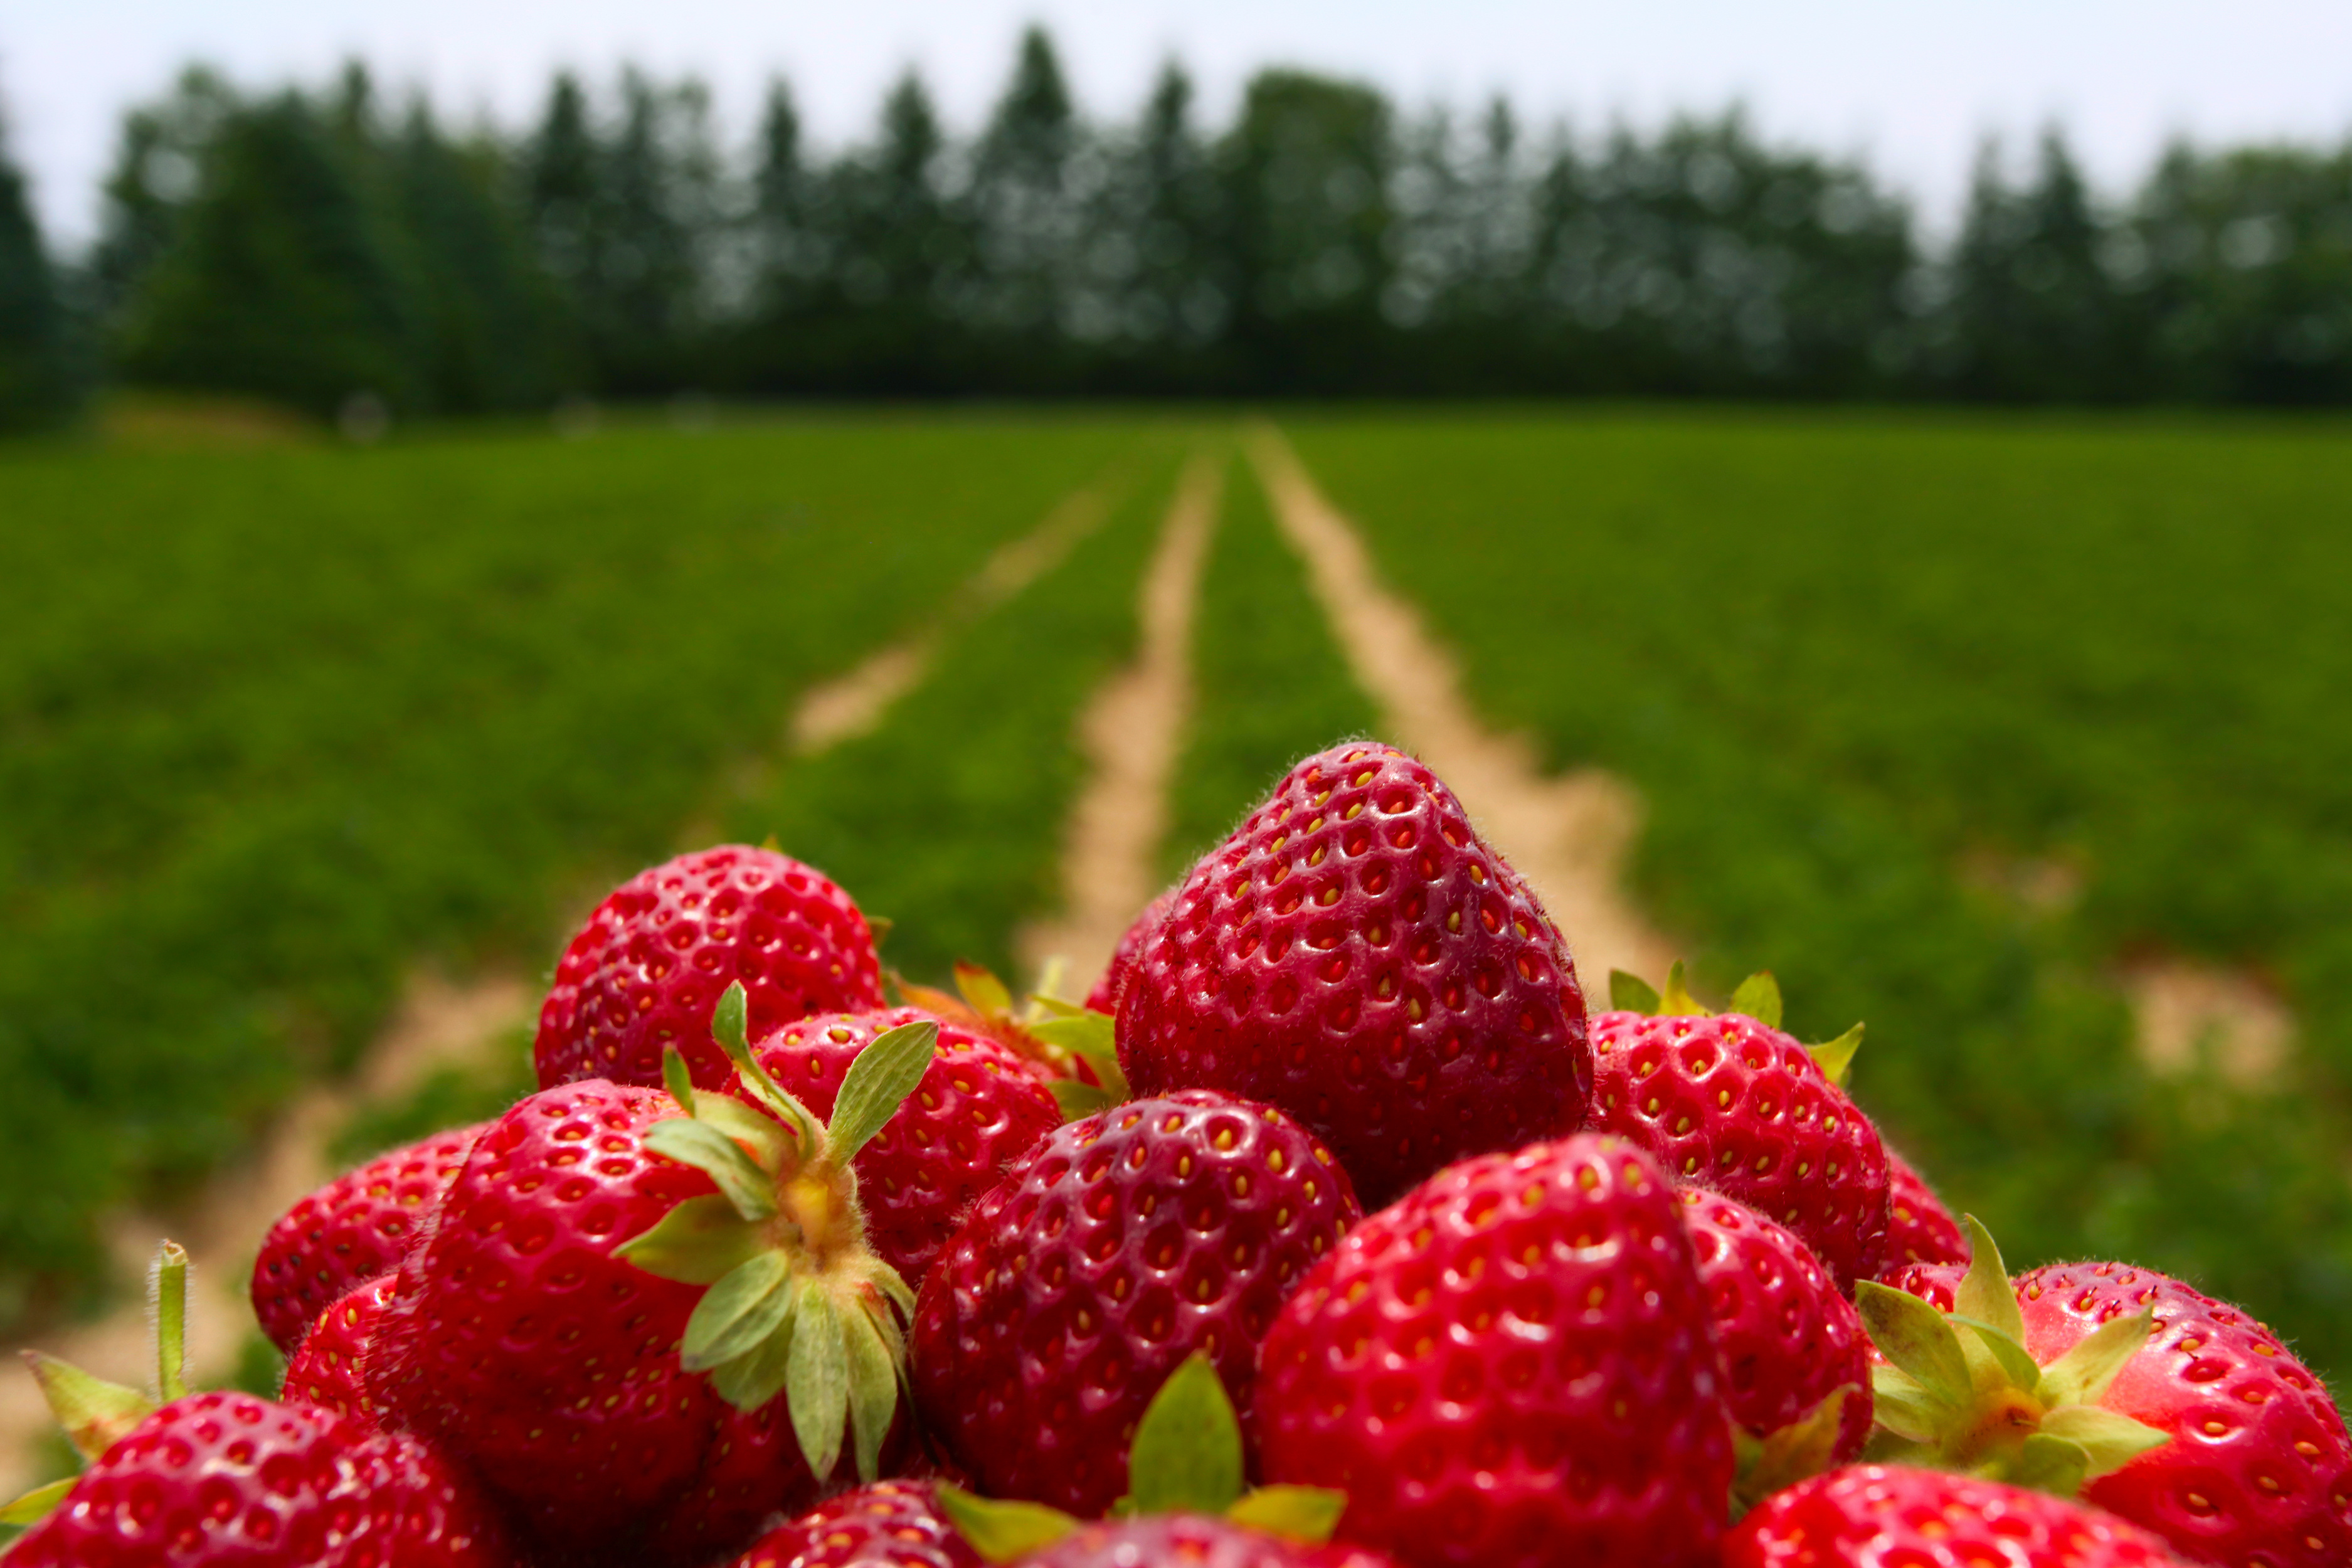 Agrobot: Automated Harvesting Robots Come to the Strawberry Field